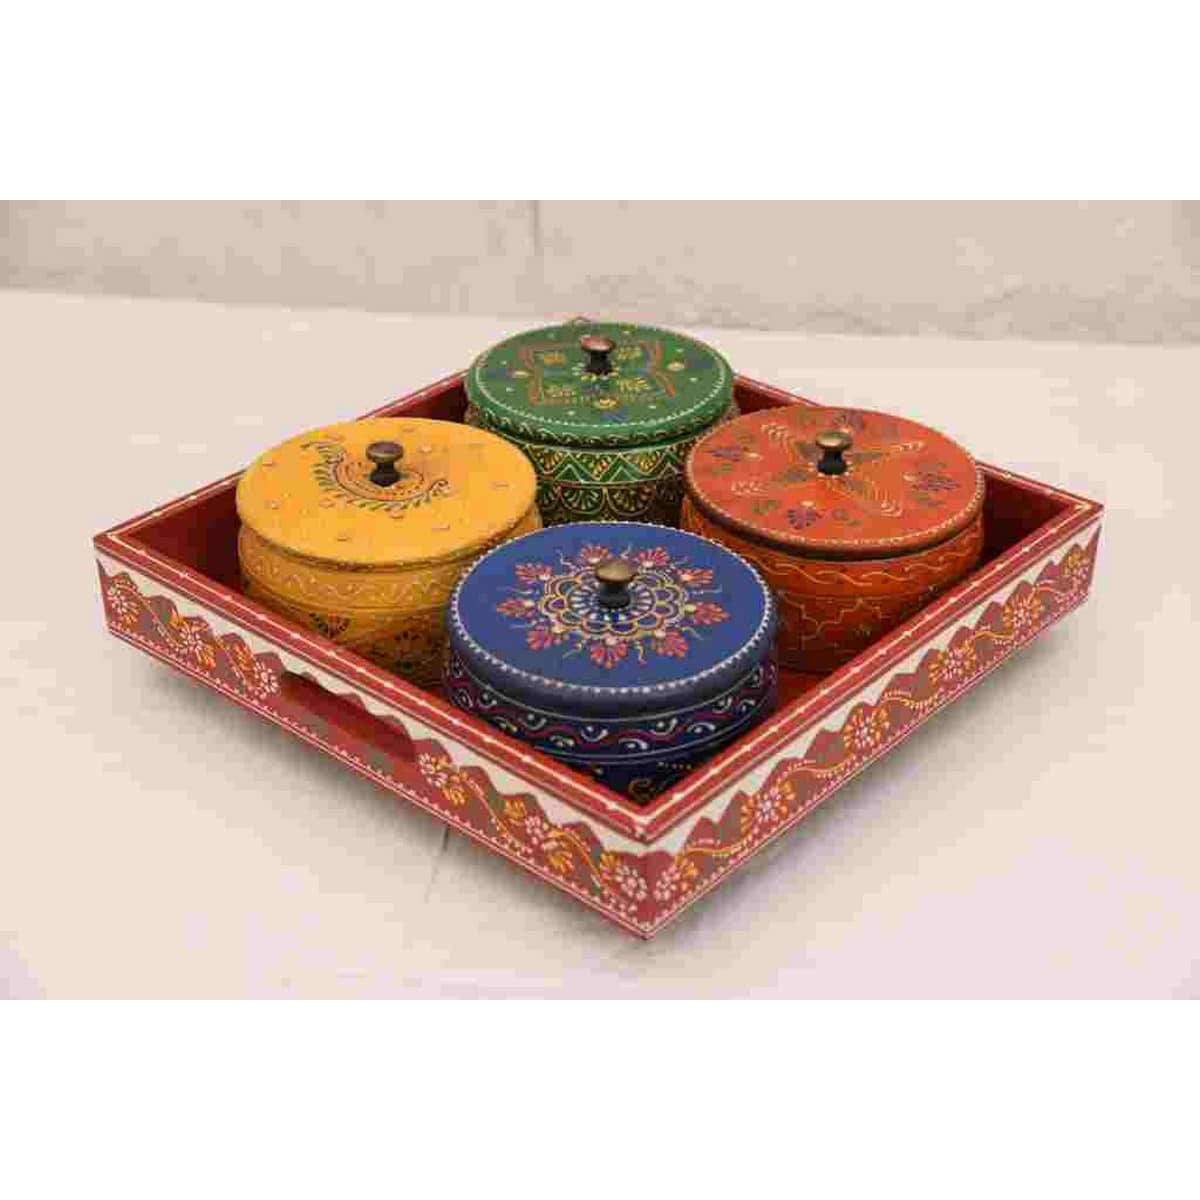 Wooden Made Colourful Looking 4 Spice Jars  